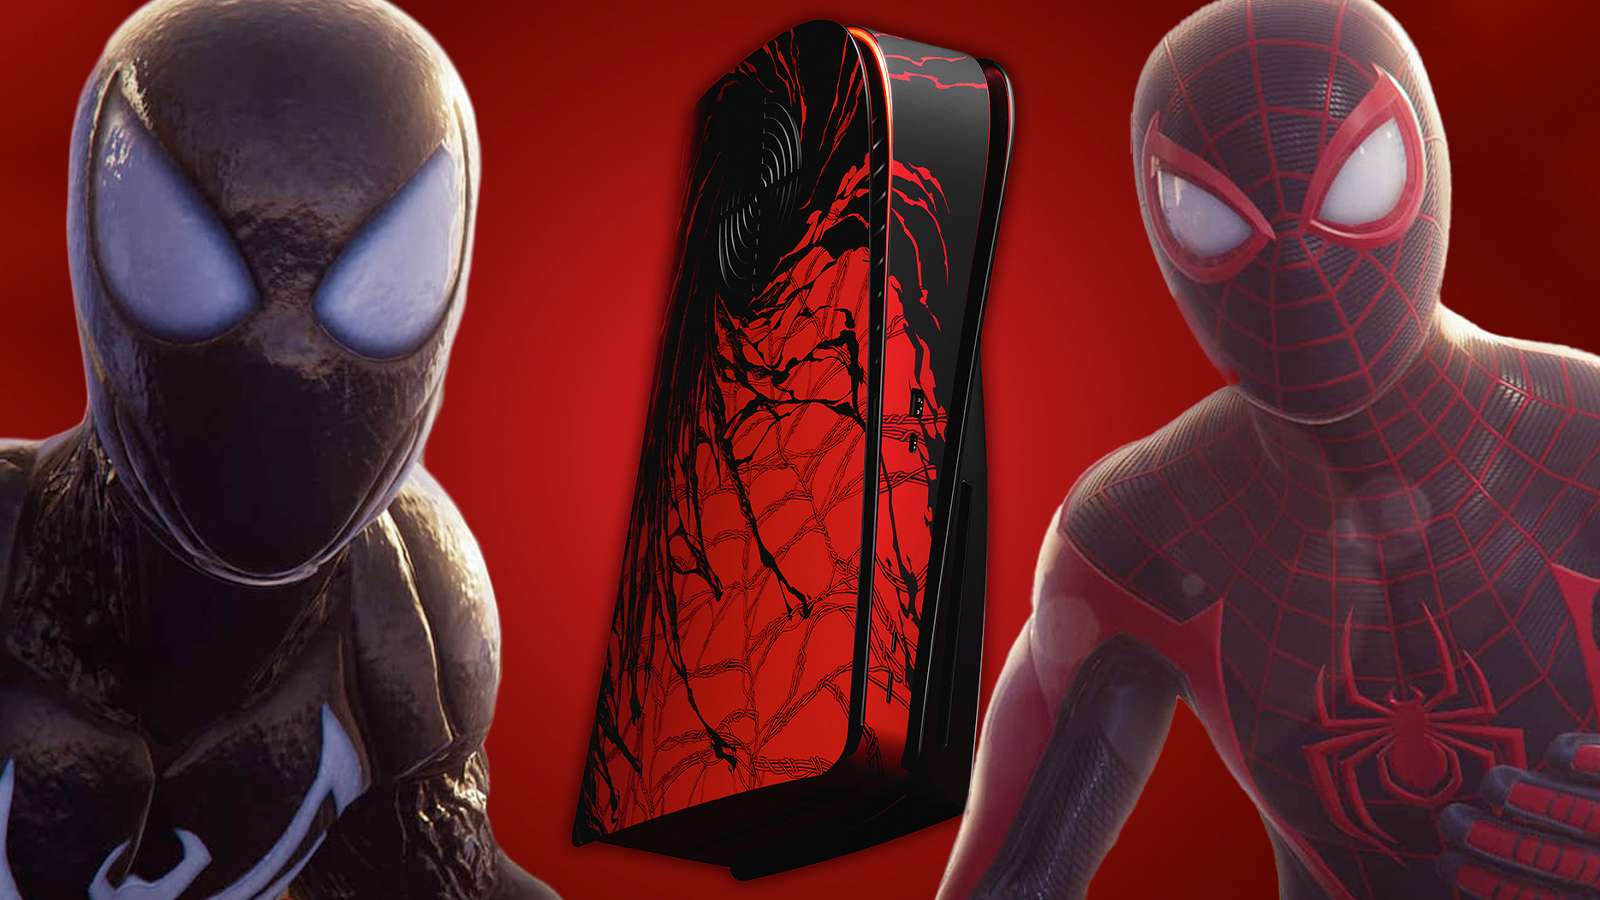 Spider-Man in black suit, and Spider-Man in a red and black suit, with a PS5 with dbrand's skin on it